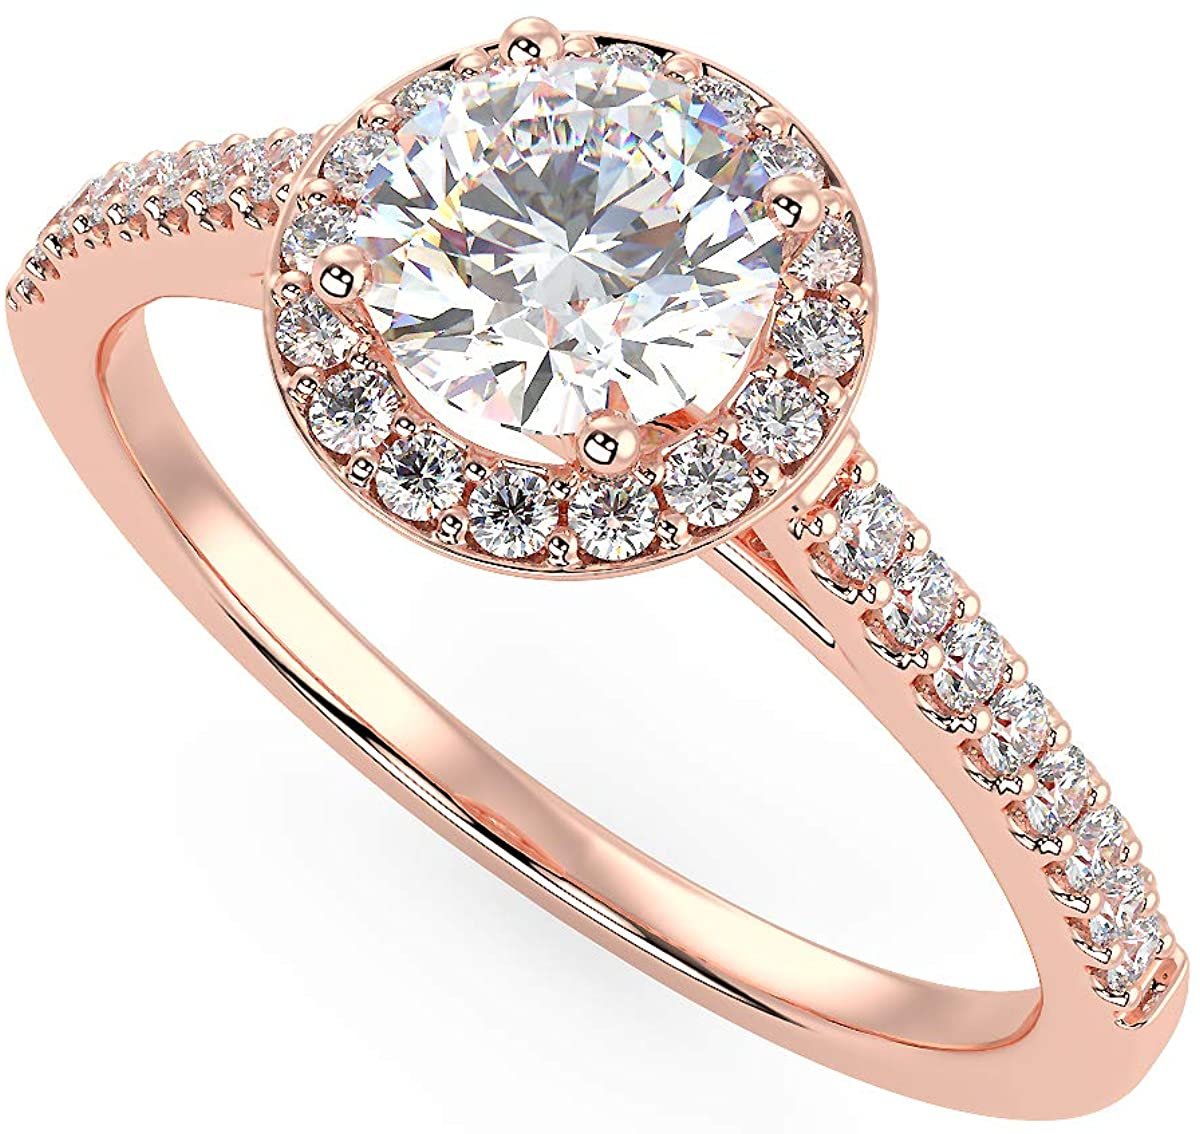 IGI Certified 14K Rose Gold 3/4 Cttw Round Brilliant-Cut Lab Created Diamond Halo Engagement Ring with Micro Pavé Band (Center Stone: G-H Color, VS1-VS2 Clarity) - Size 6-3/4